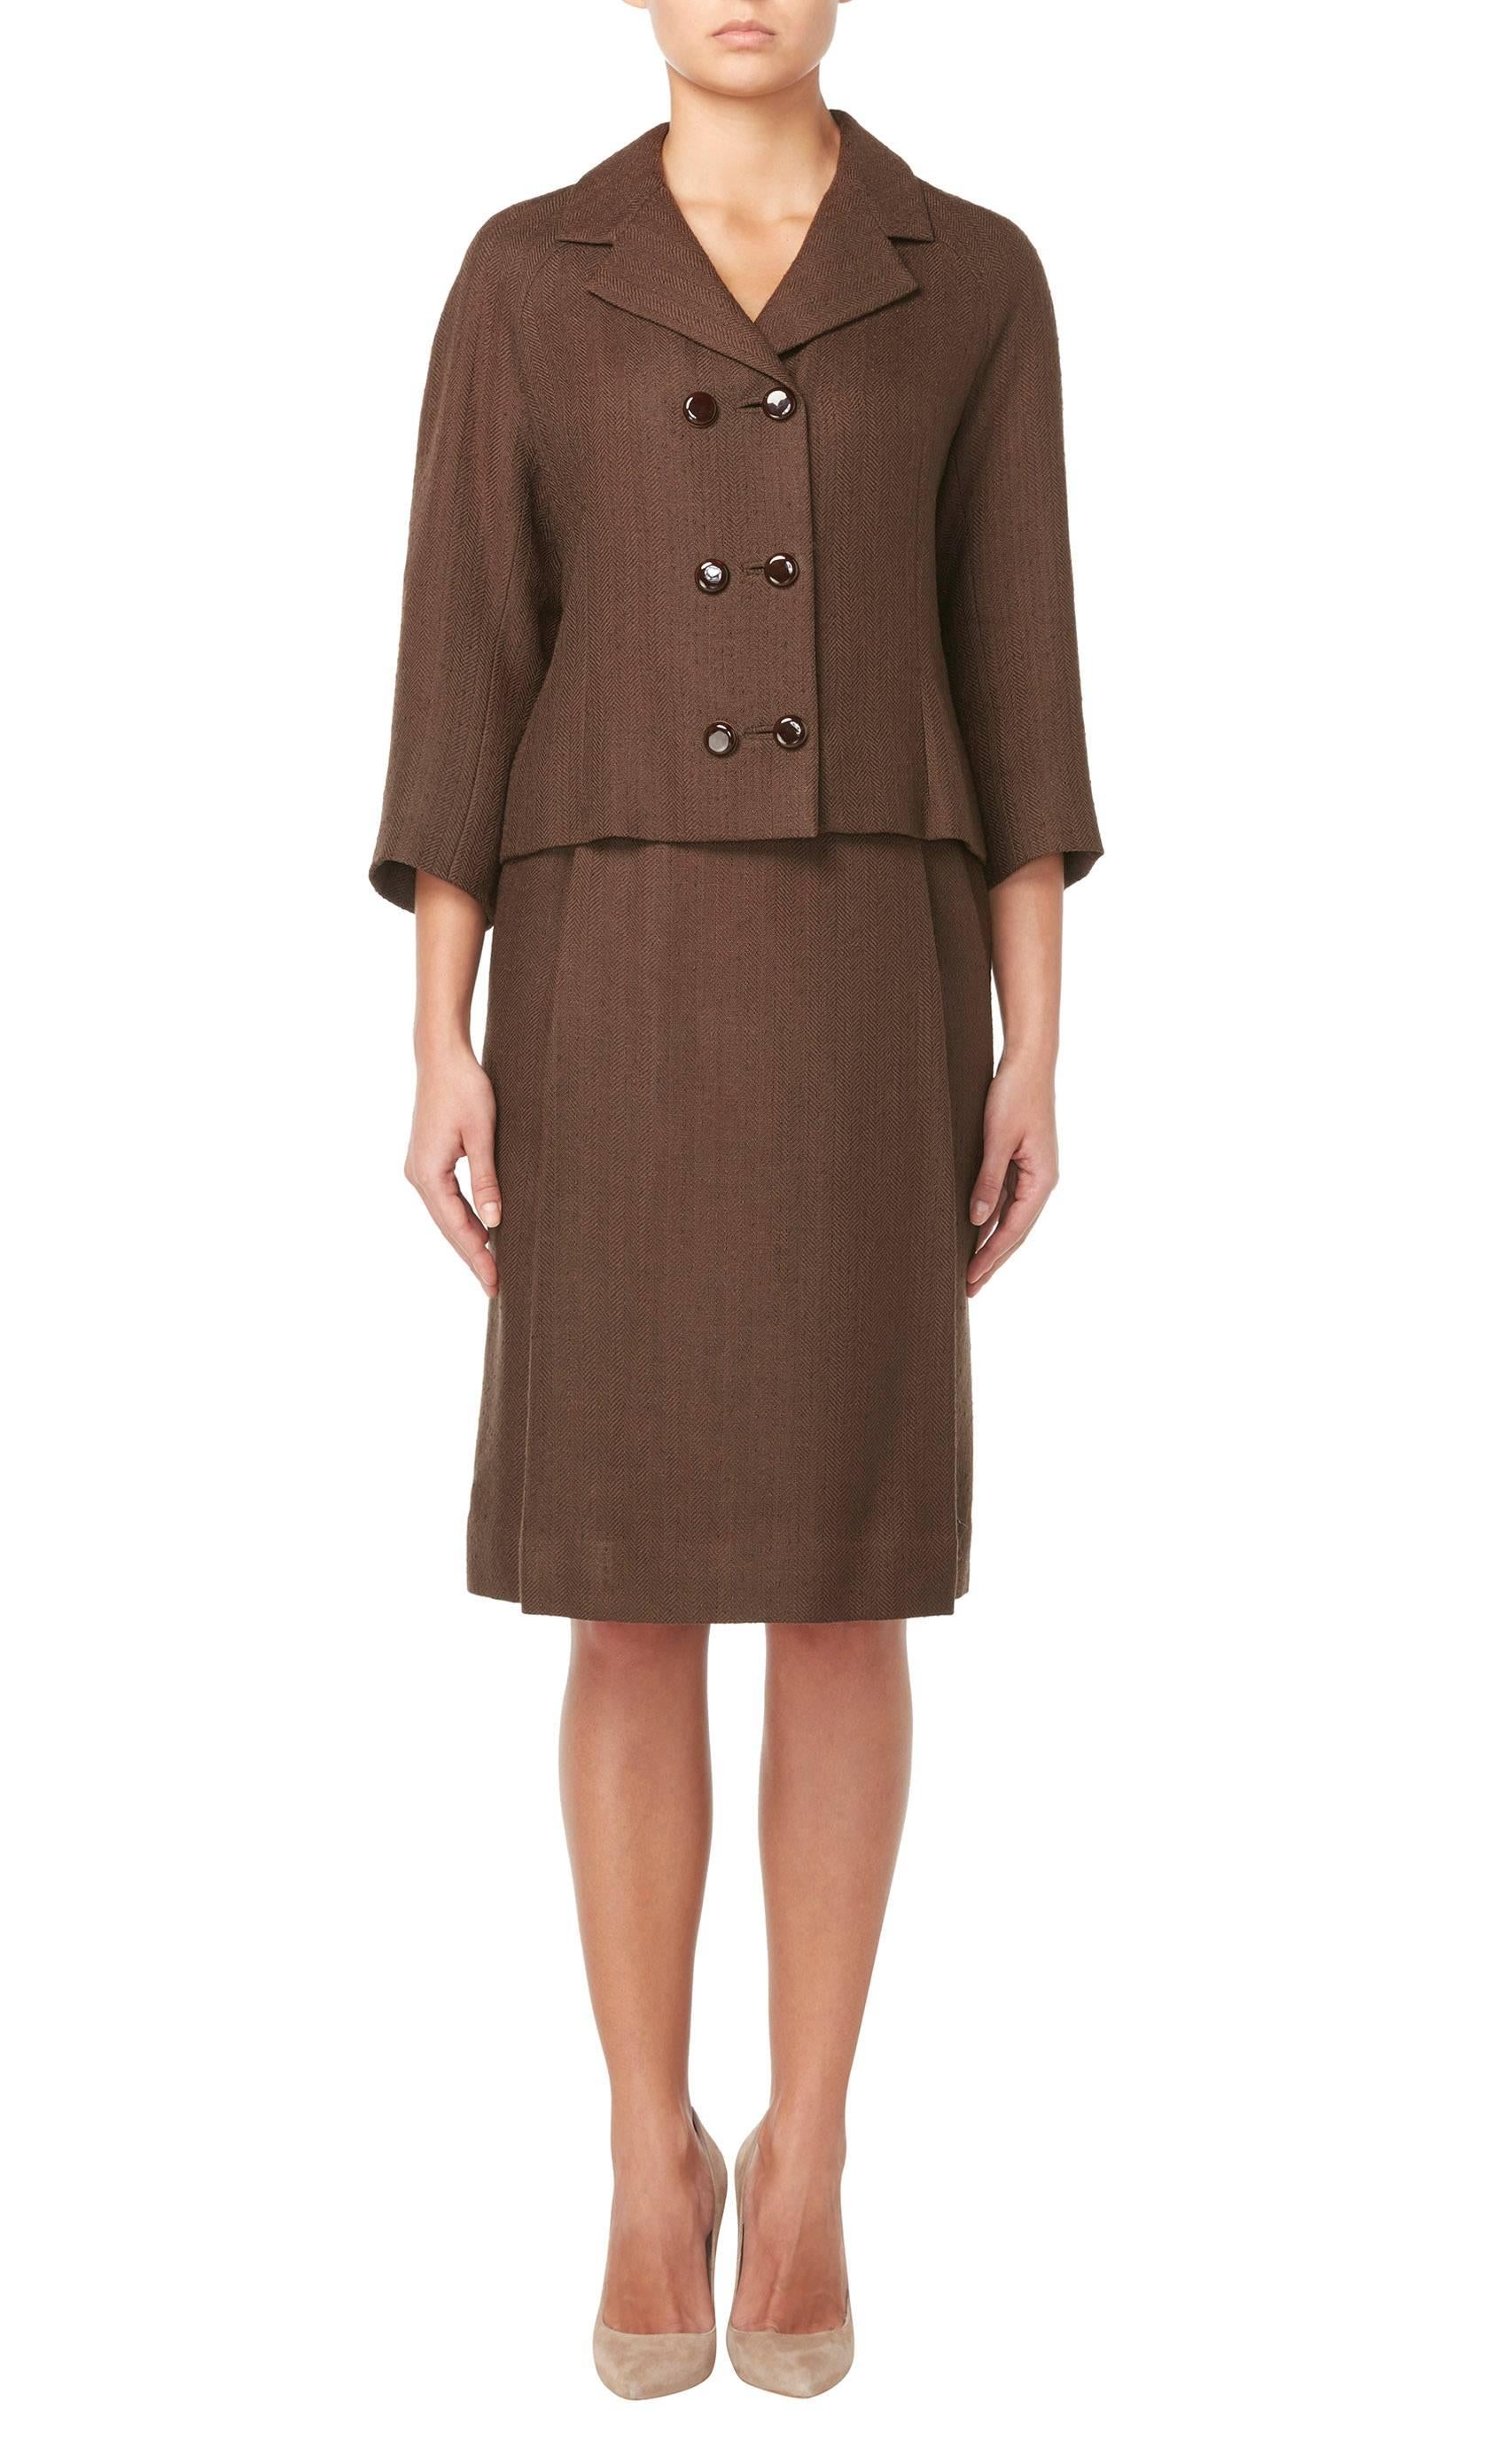 A beautifully tailored haute couture suit by Balenciaga himself. Constructed in fine brown wool with a herringbone weave, the double-breasted jacket has its original brown lacquer and gilt buttons, while the skirt features two hidden pockets and